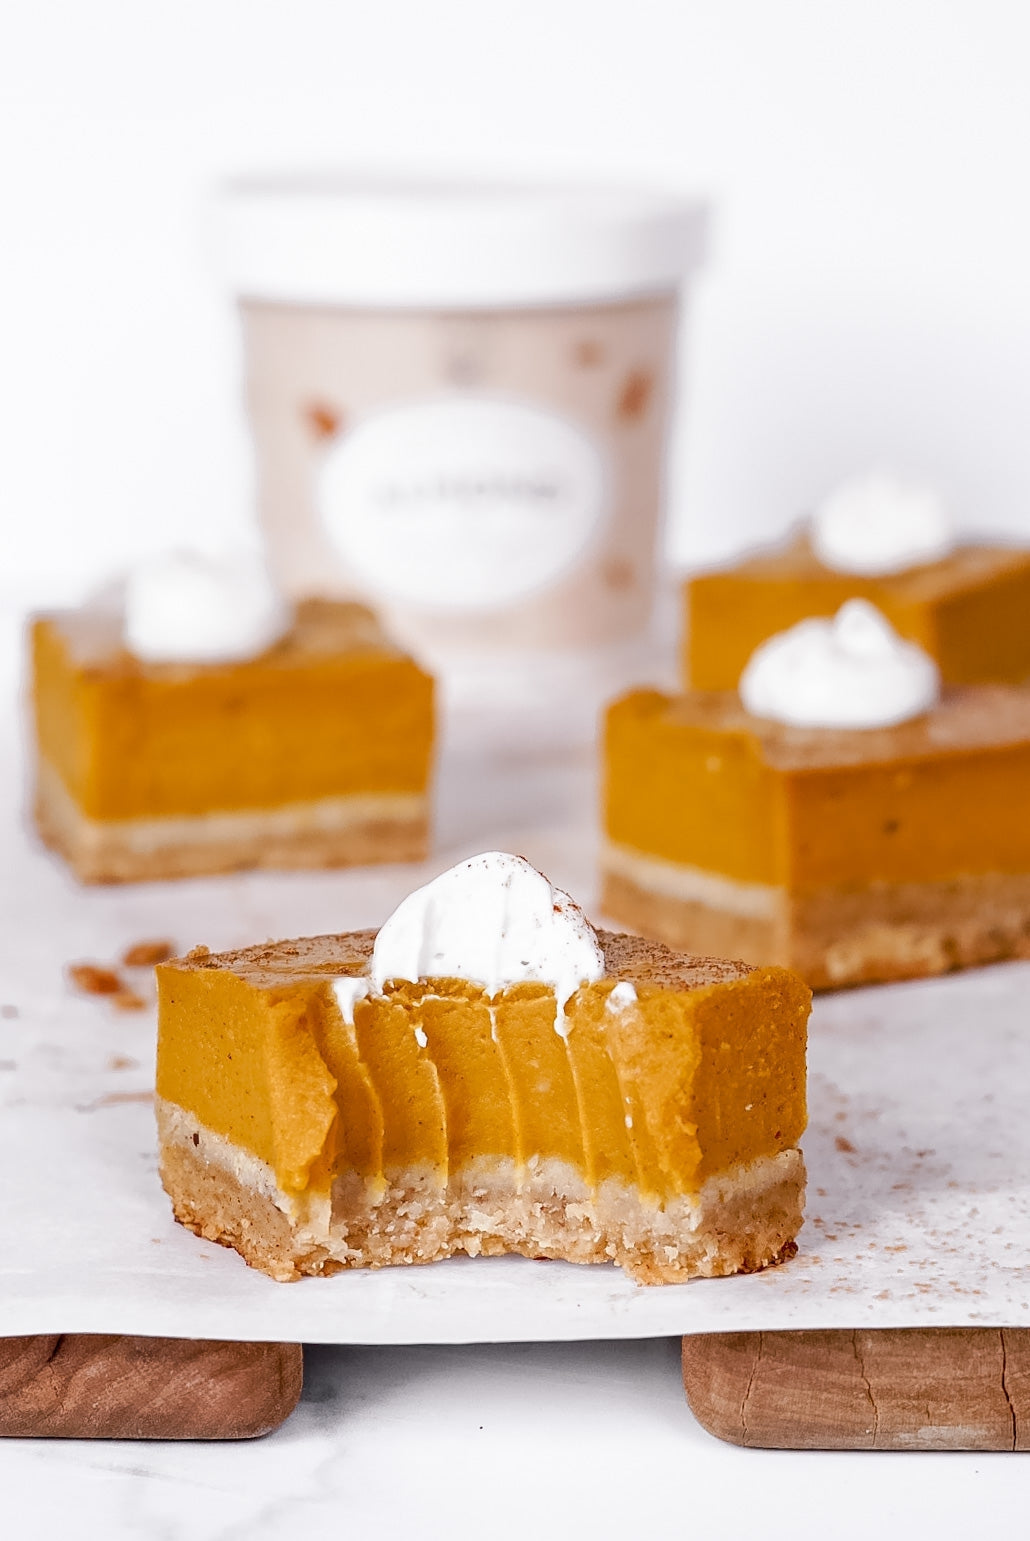 Vegan Pumpkin Pie Bars by @what.shes.cooking